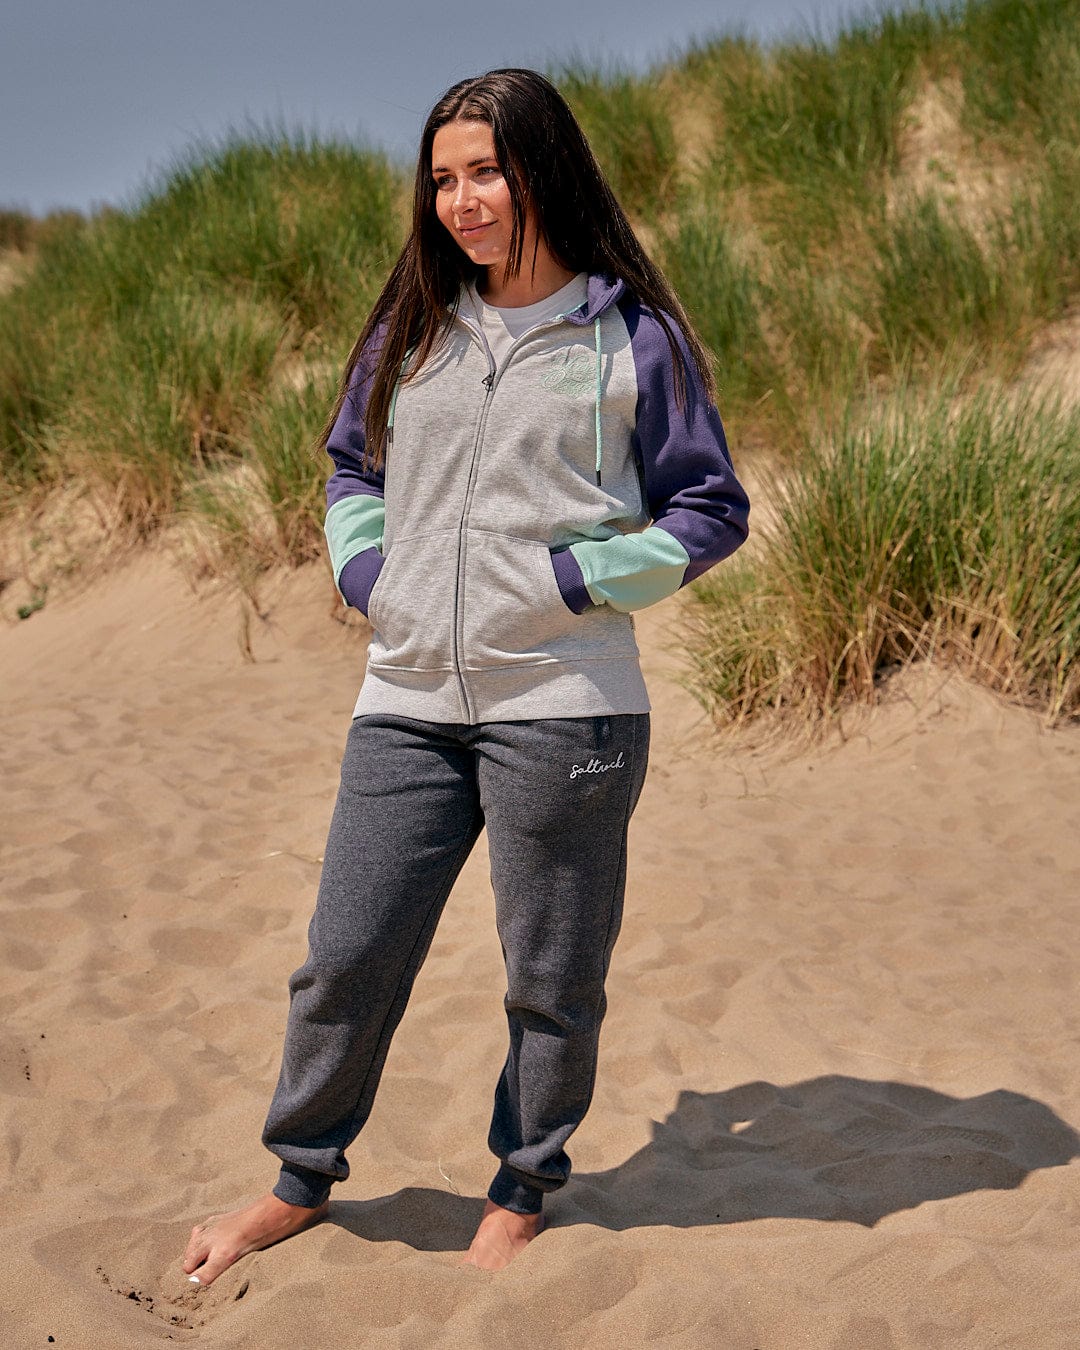 A girl standing on a sand dune in a Saltrock Jan Womens Zip Hoodie - Grey and sweatpants, exuding effortless style.